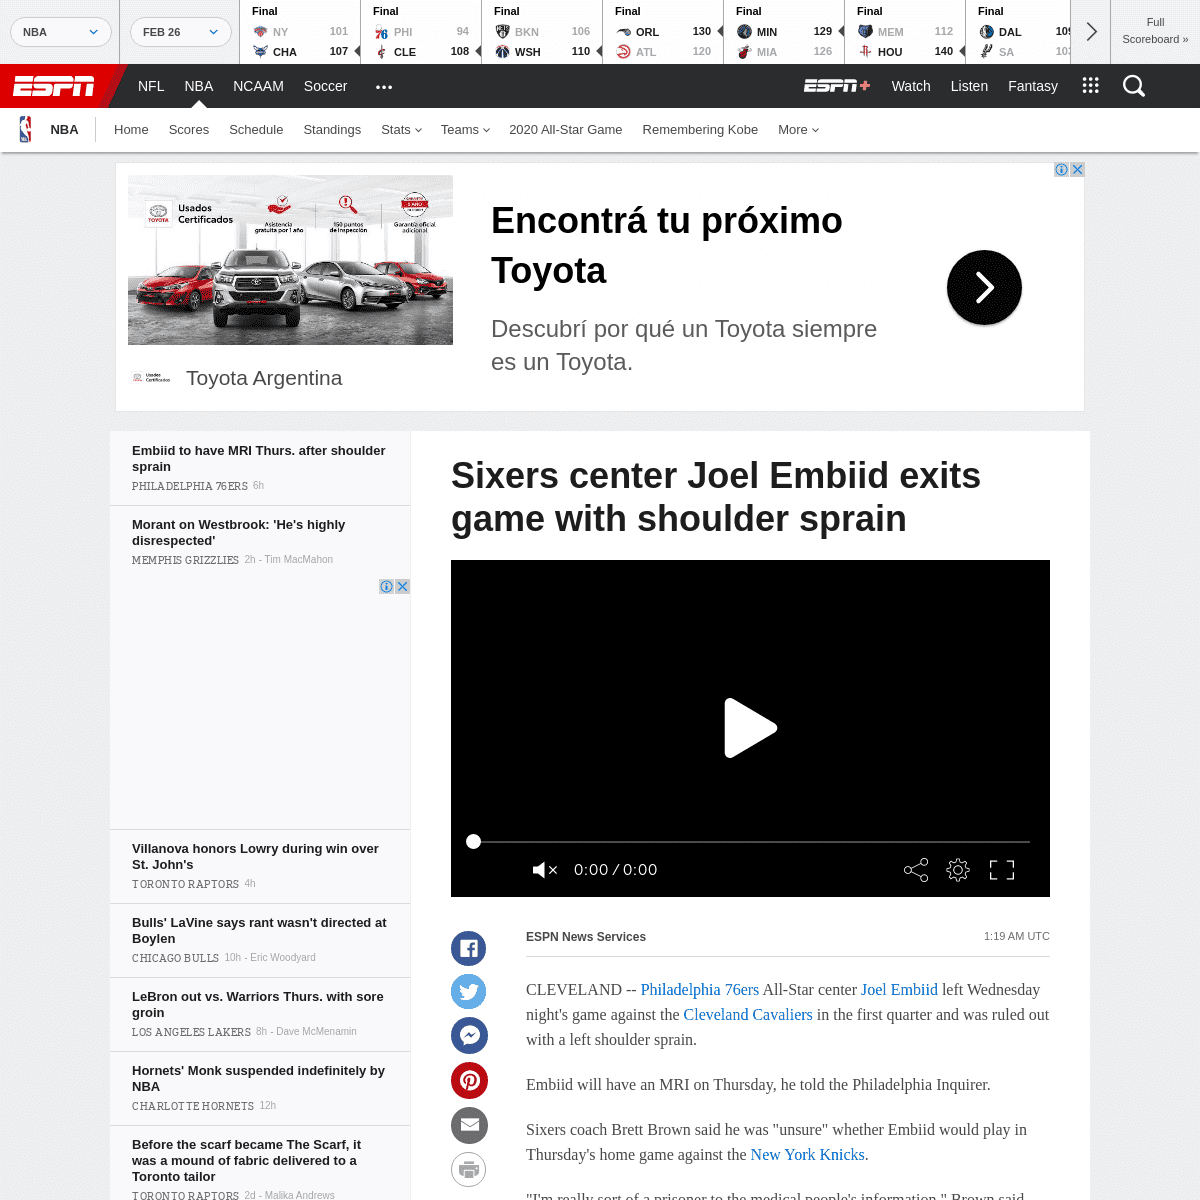 A complete backup of www.espn.com/nba/story/_/id/28789512/sixers-center-joel-embiid-exits-game-shoulder-sprain